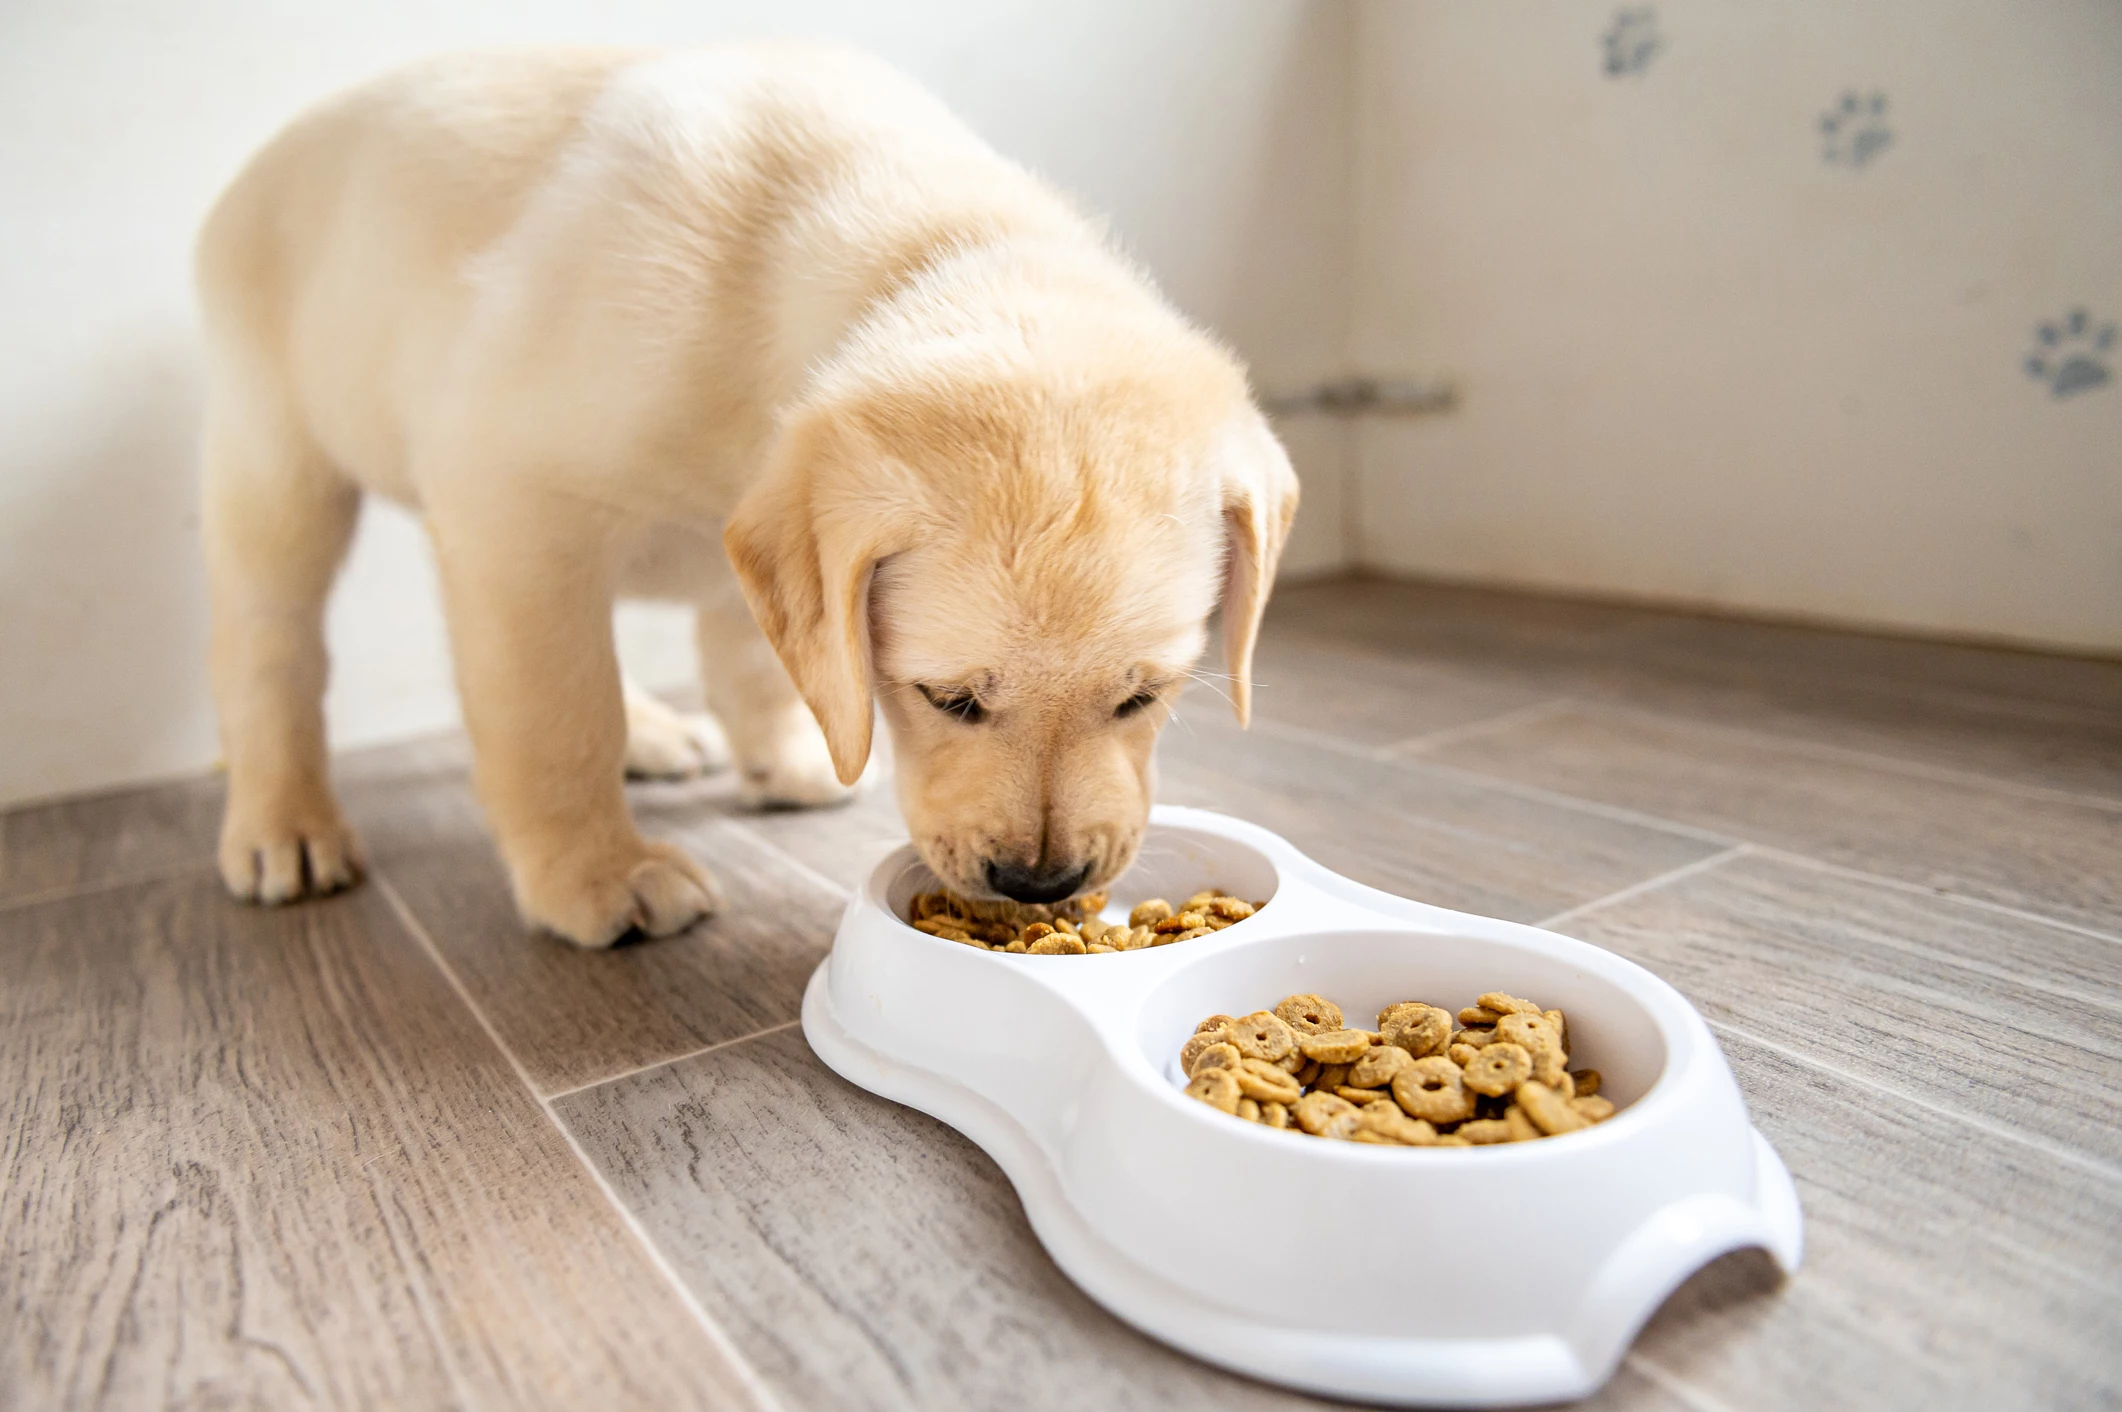 Is Vegan Dog Food Right for Your Pet? The Experts Weigh In